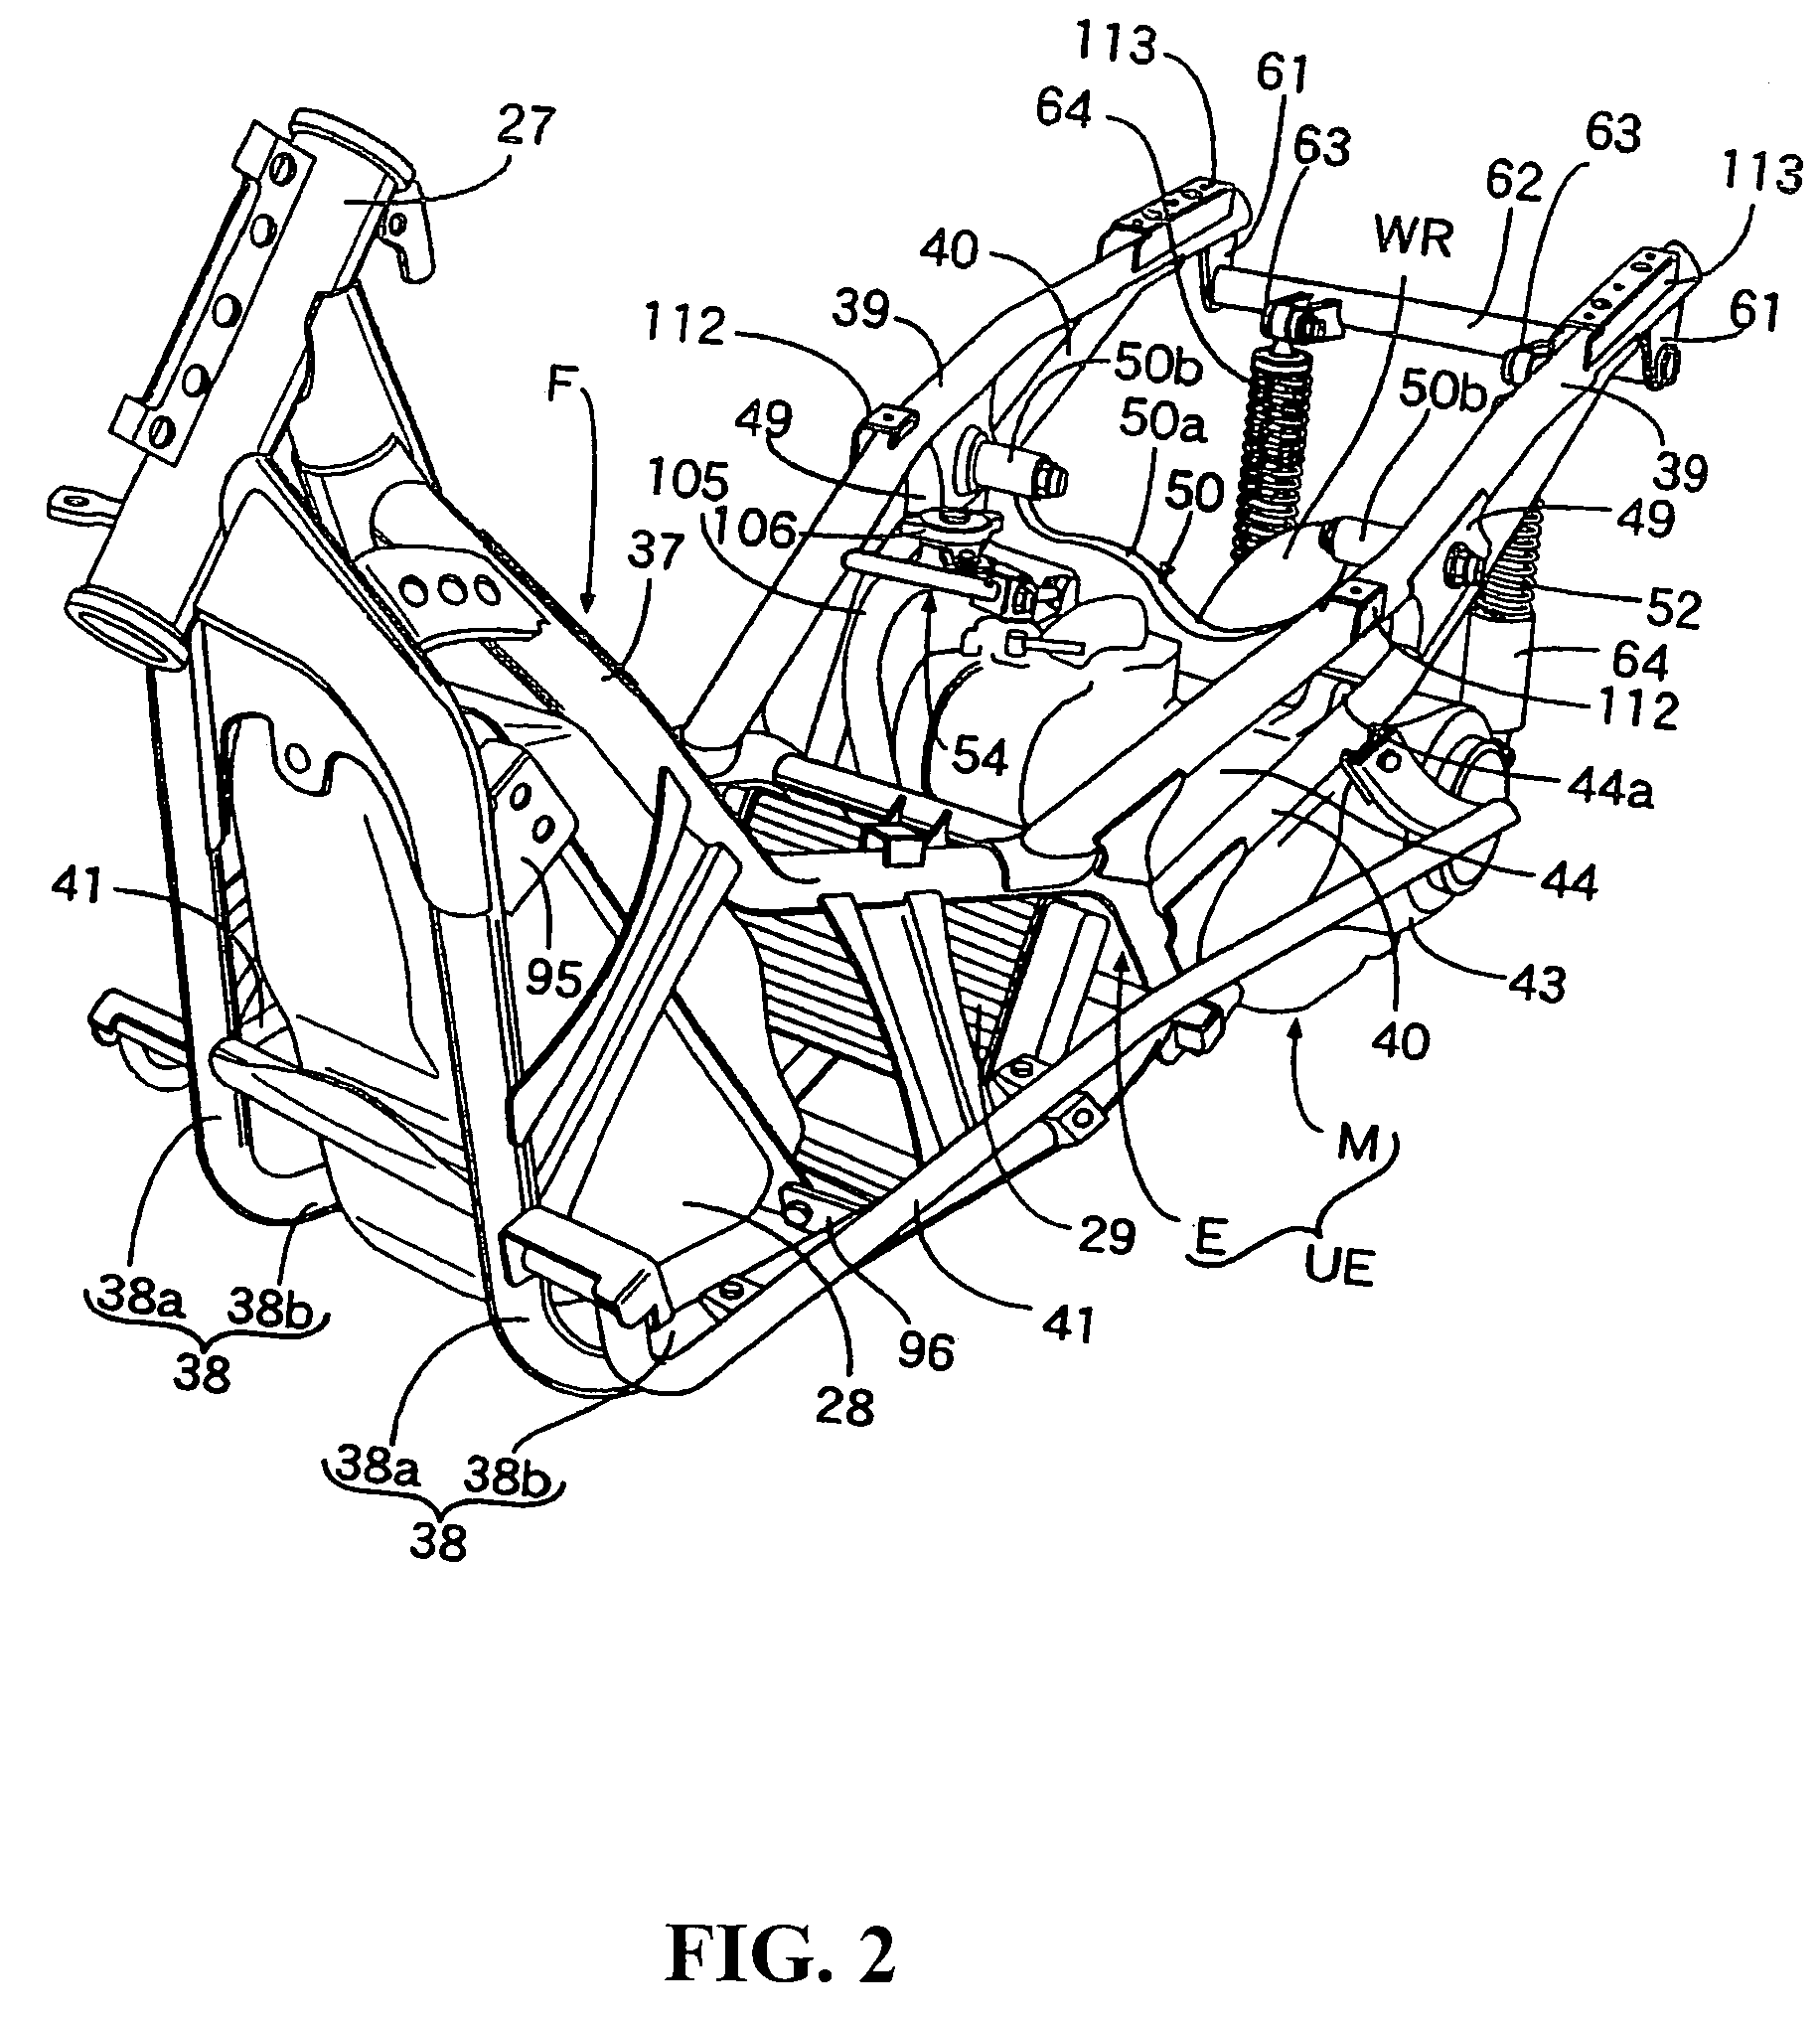 Lock release operator layout structure in vehicle